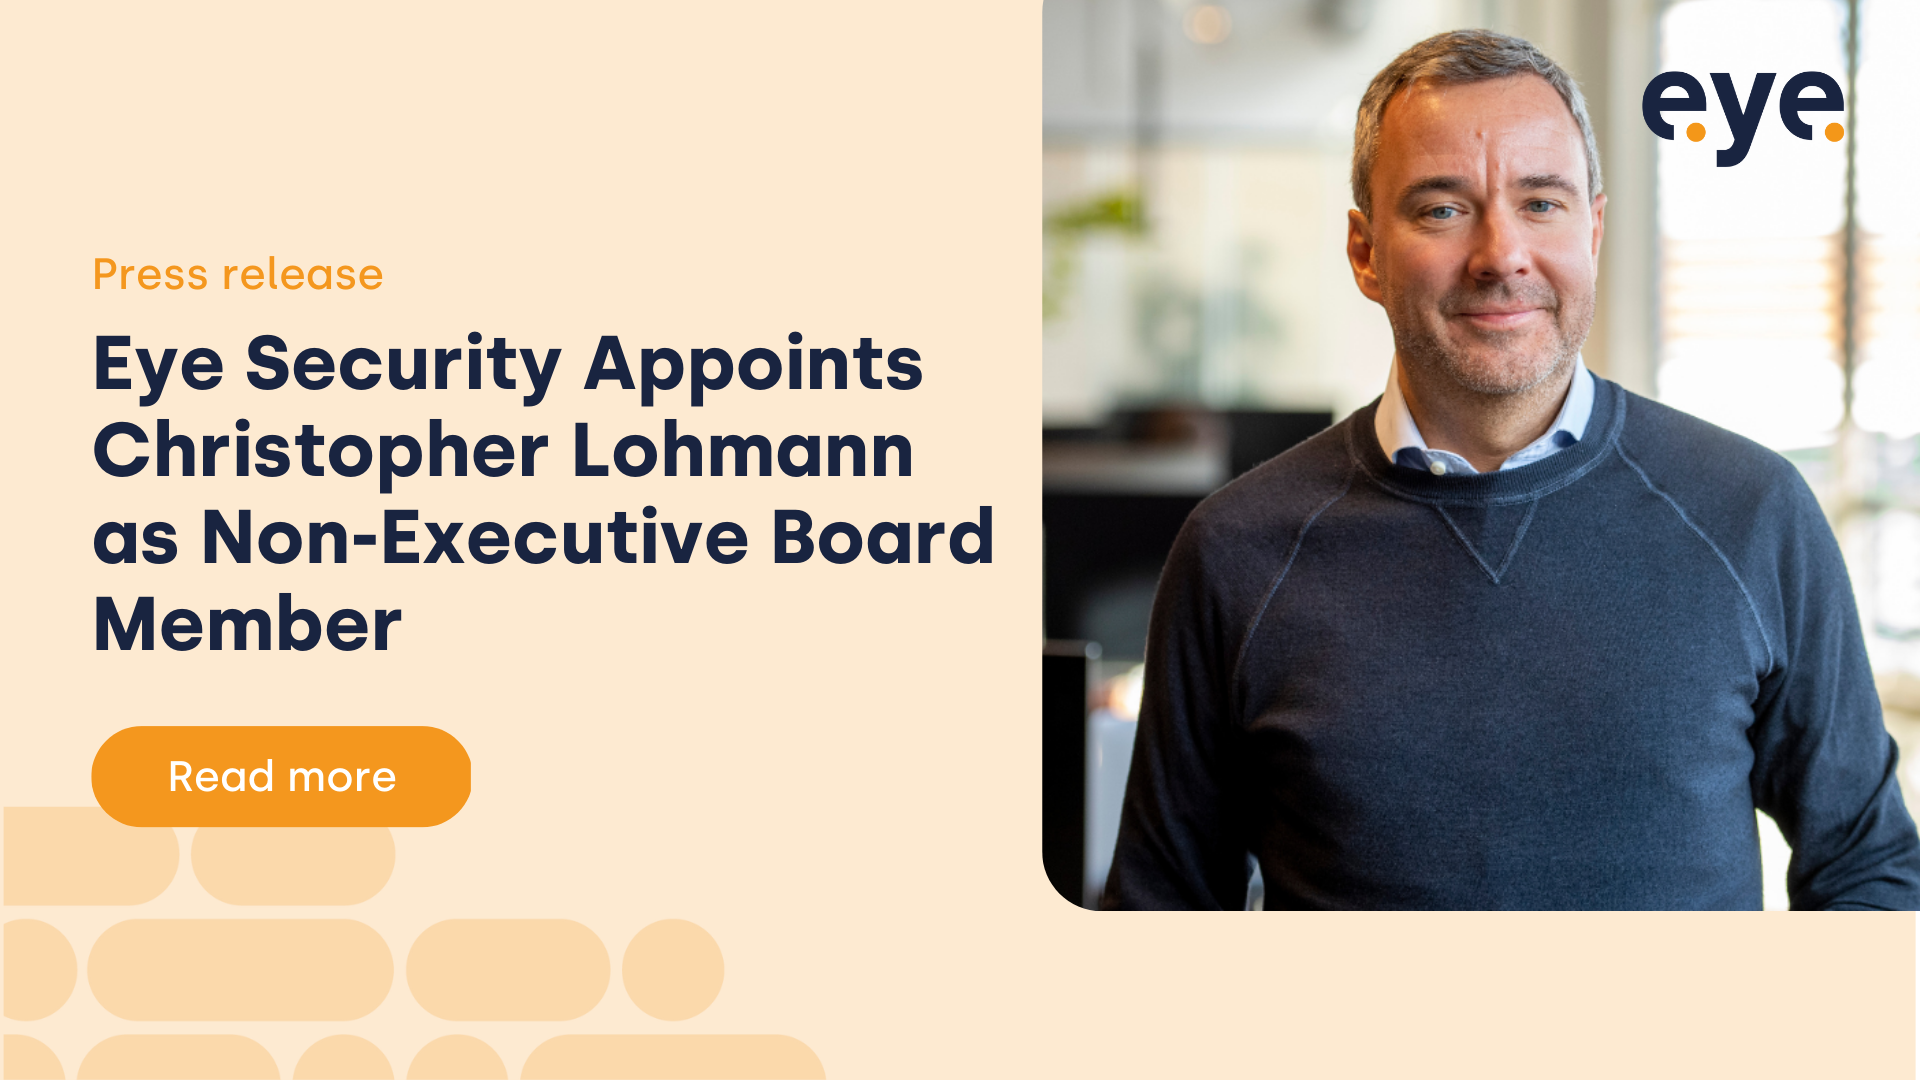 Eye Security Appoints Christopher Lohmann as Non-Executive Board Member